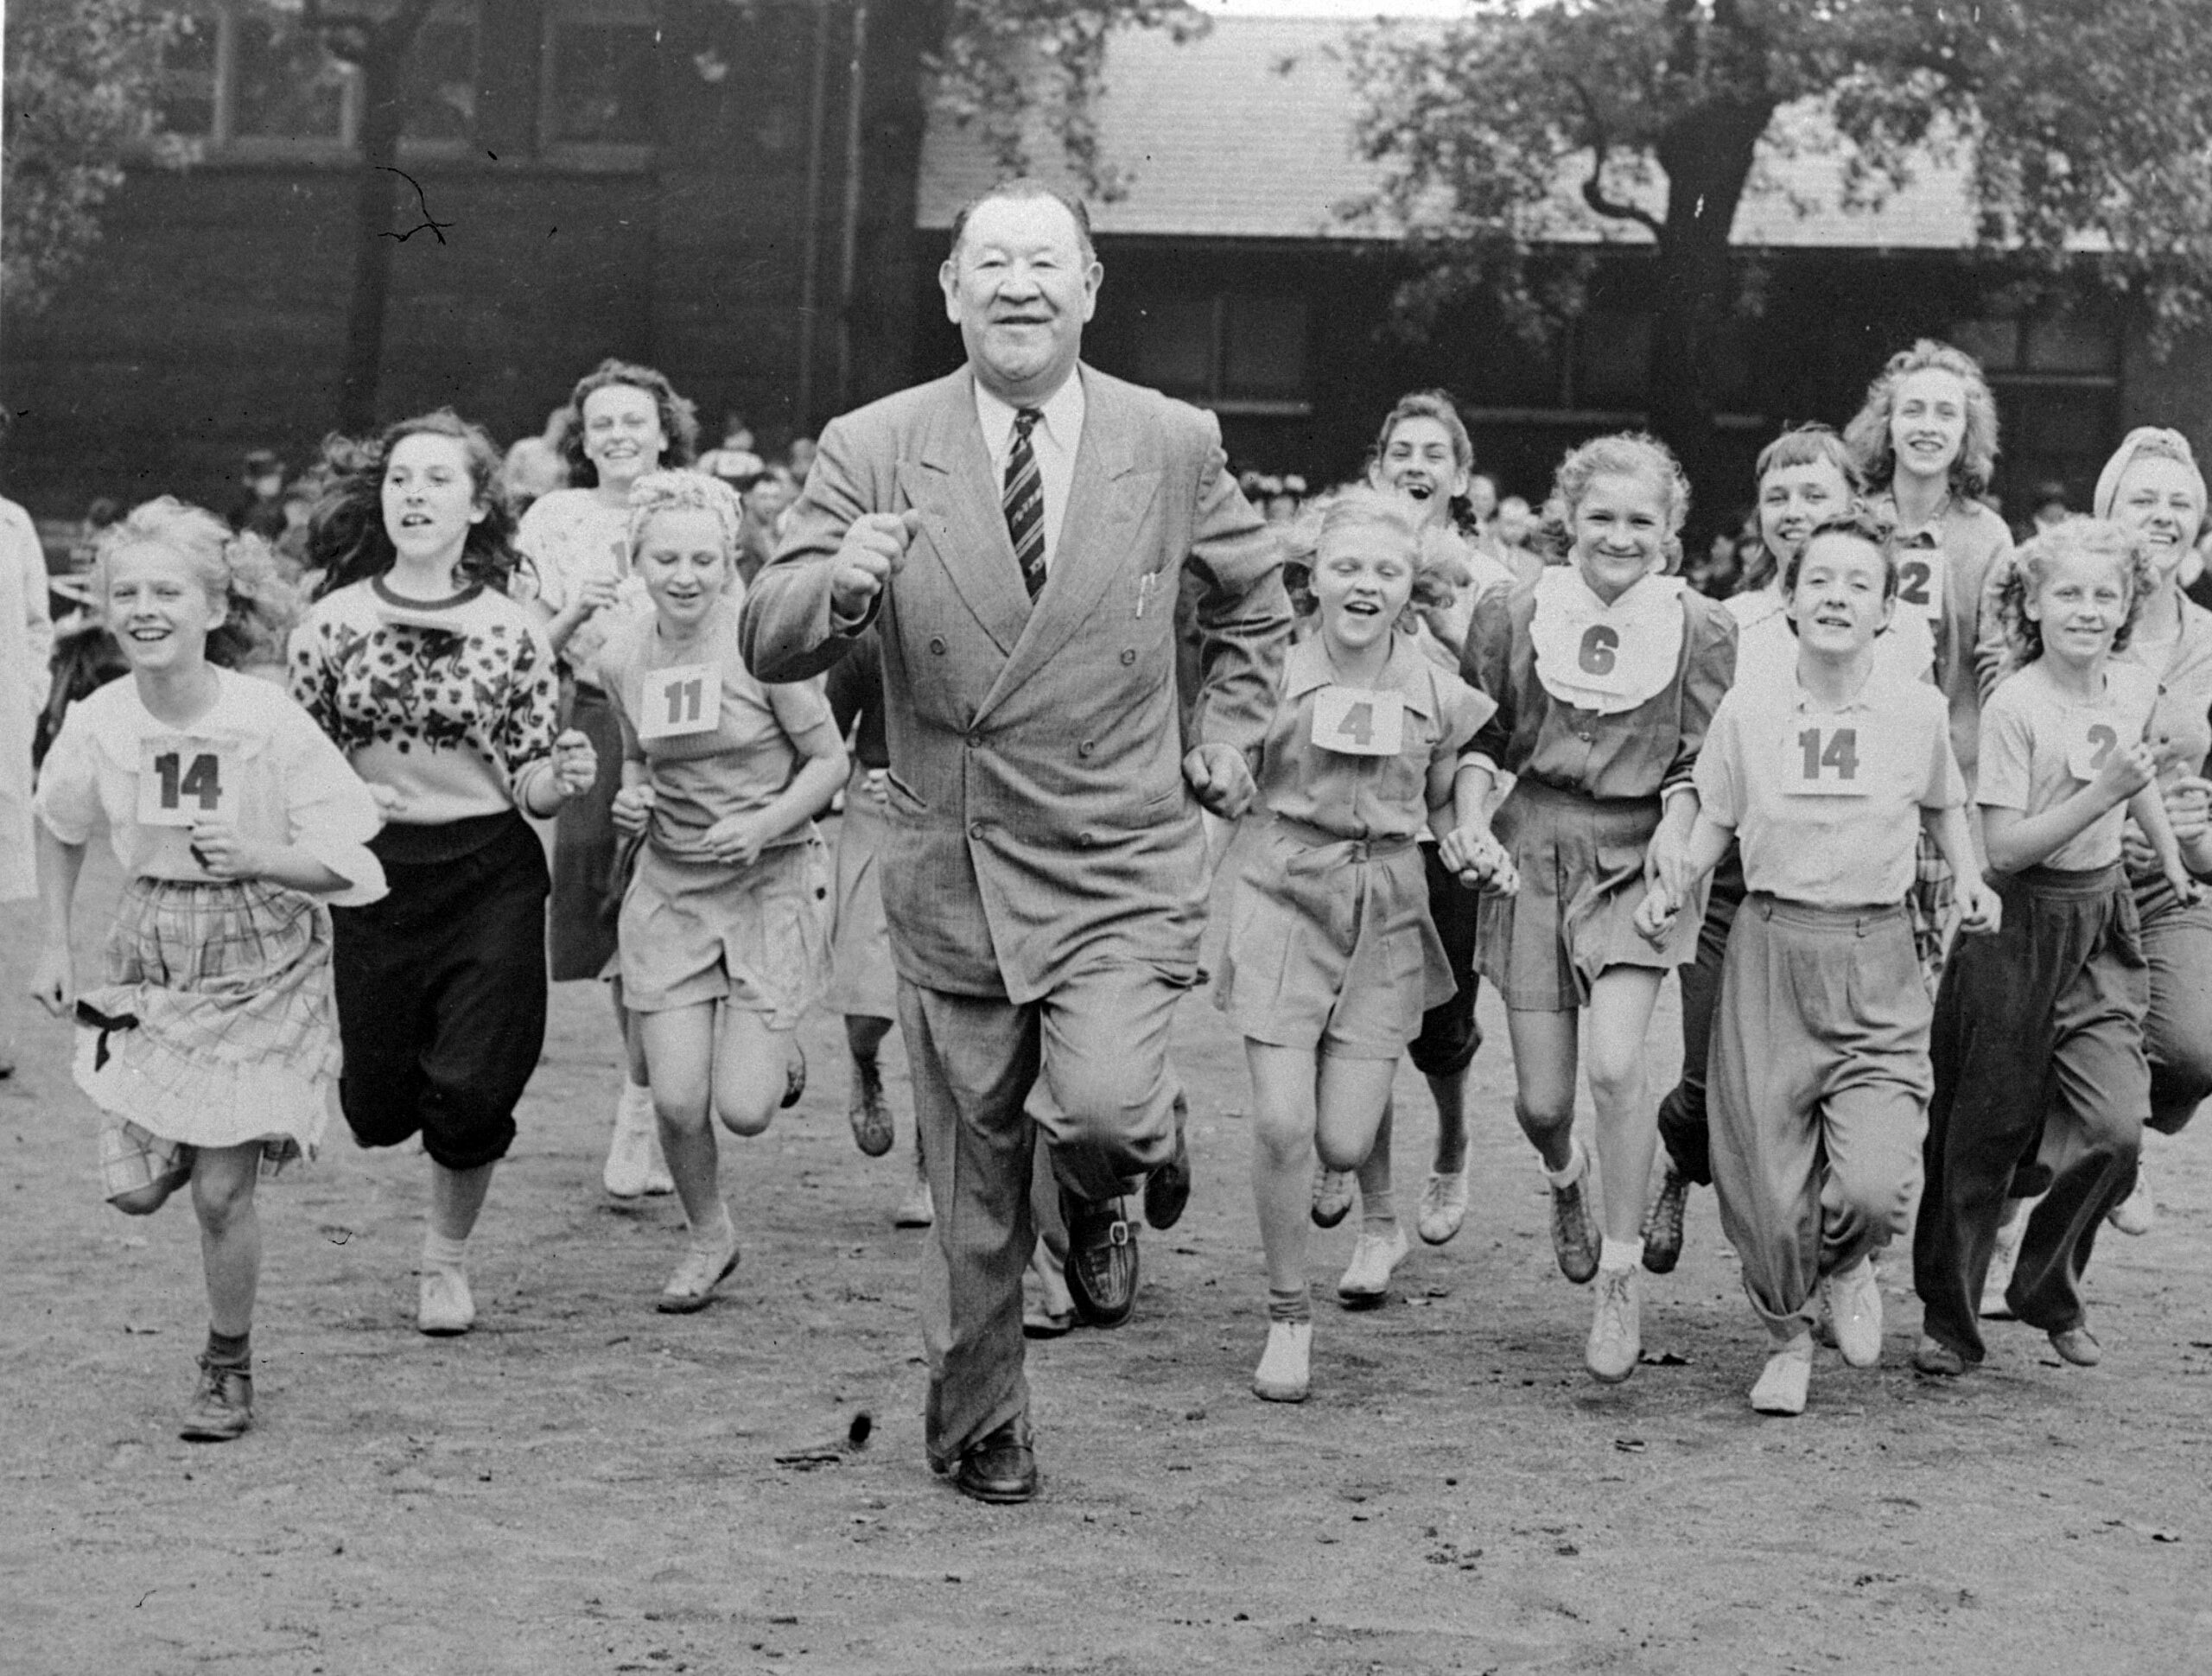 FILE - Big Jim Thorpe, famed American athlete and former U.S. Olympic great, center, sets a fast pace for some girls during a "junior olympics" event on Chicago's south side June 6, 1948 sponsored by a V.F.W. post. Jim Thorpe has been reinstated as the sole winner of the 1912 Olympic pentathlon and decathlon — nearly 110 years after being stripped of those gold medals for violations of strict amateurism rules of the time. The International Olympic Committee confirmed that an announcement was planned later Friday, July 15, 2022. (AP Photo, File)